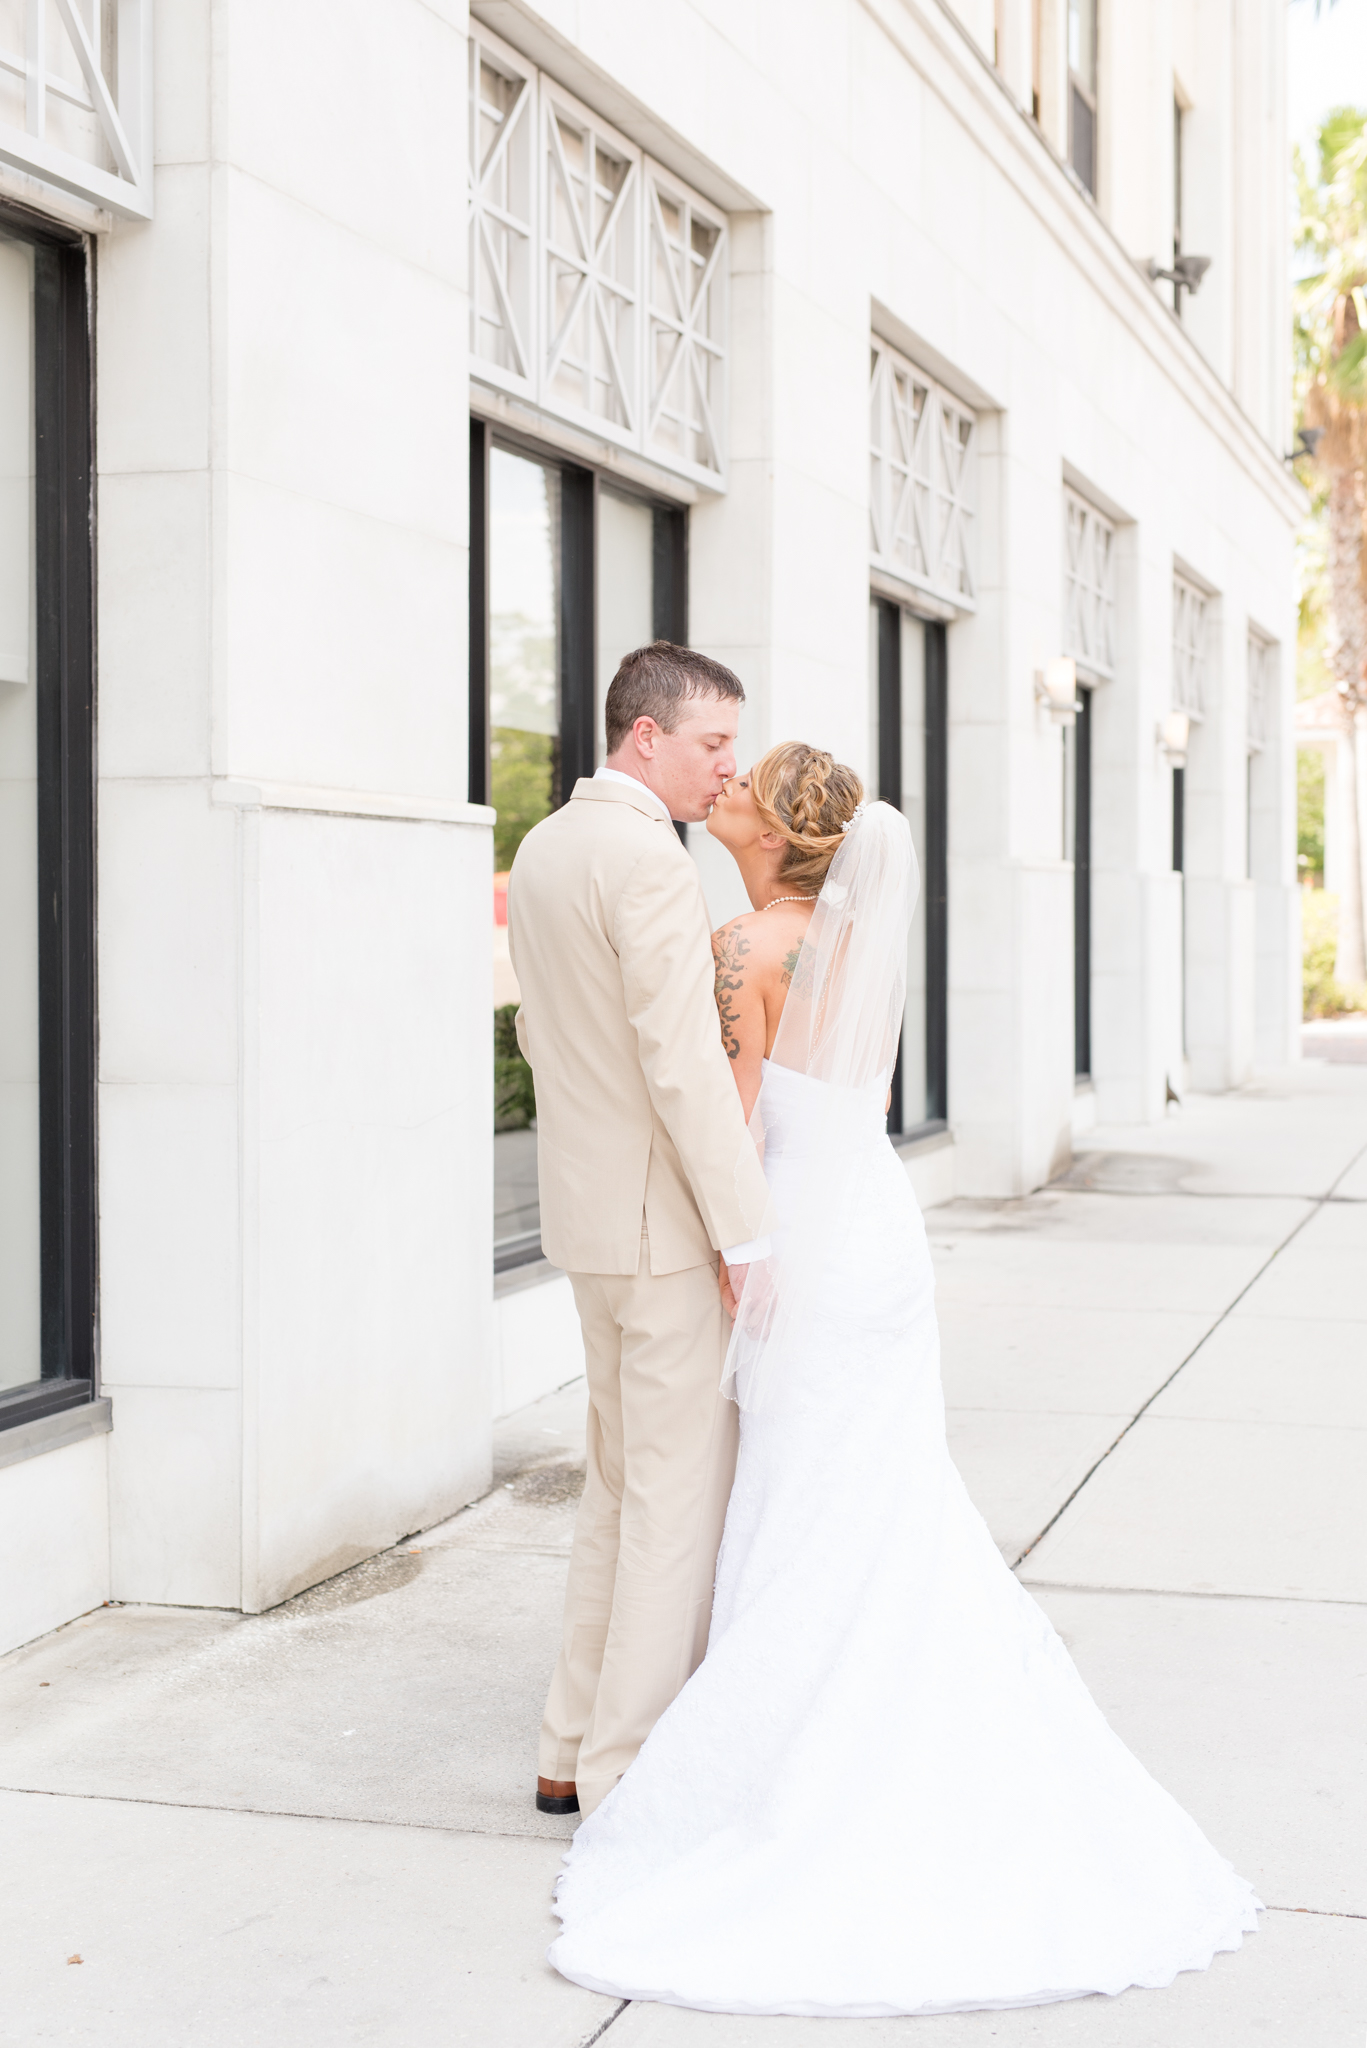 Bride and groom kiss on downtown street.